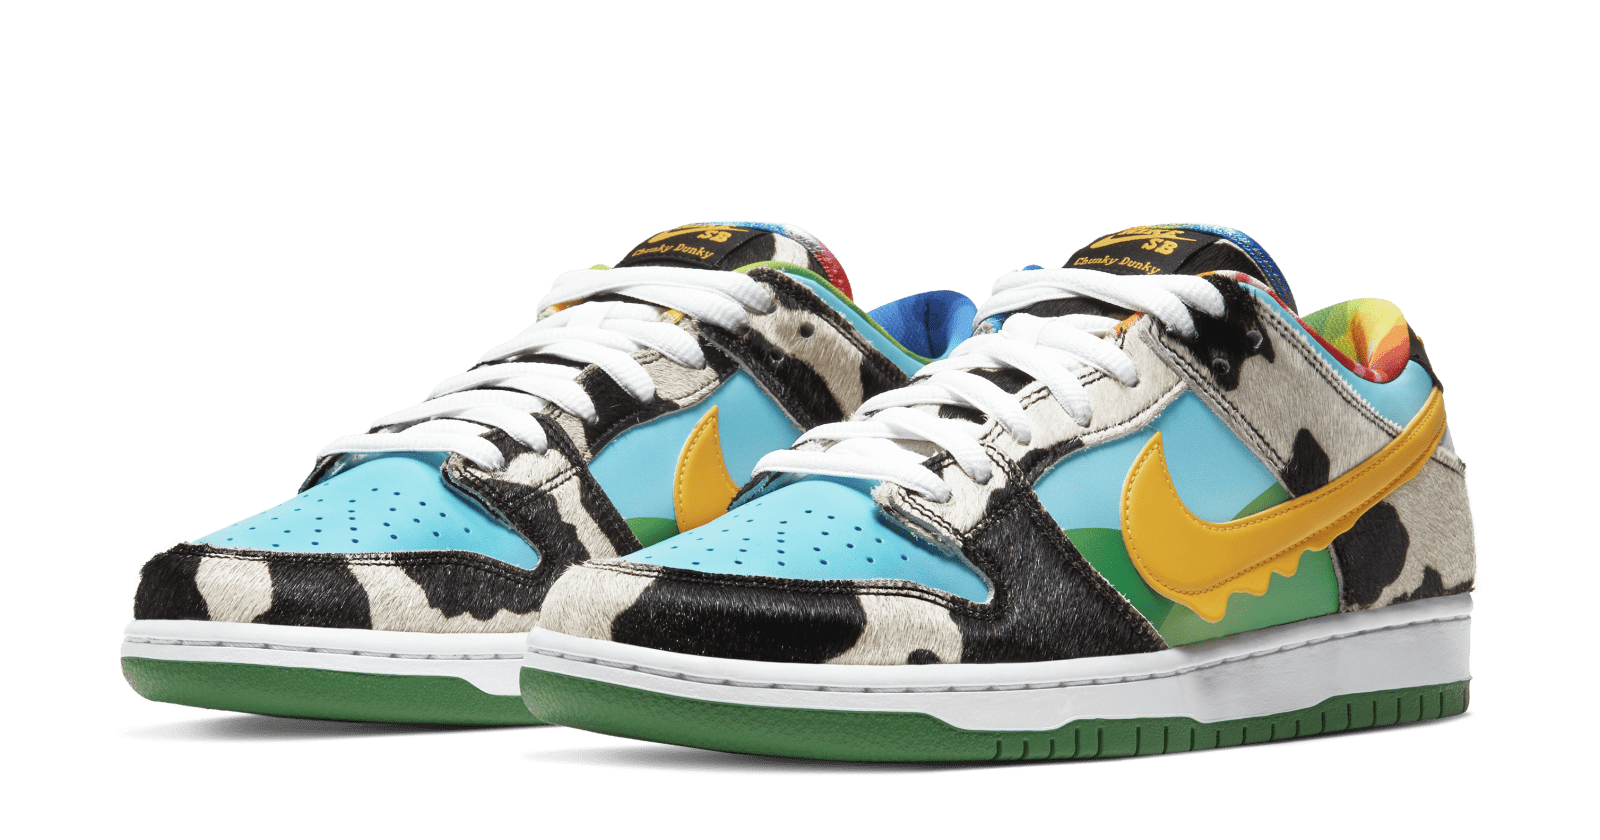 Ben & Jerry's Nike SB Dunk Low Officially Revealed: Release Info